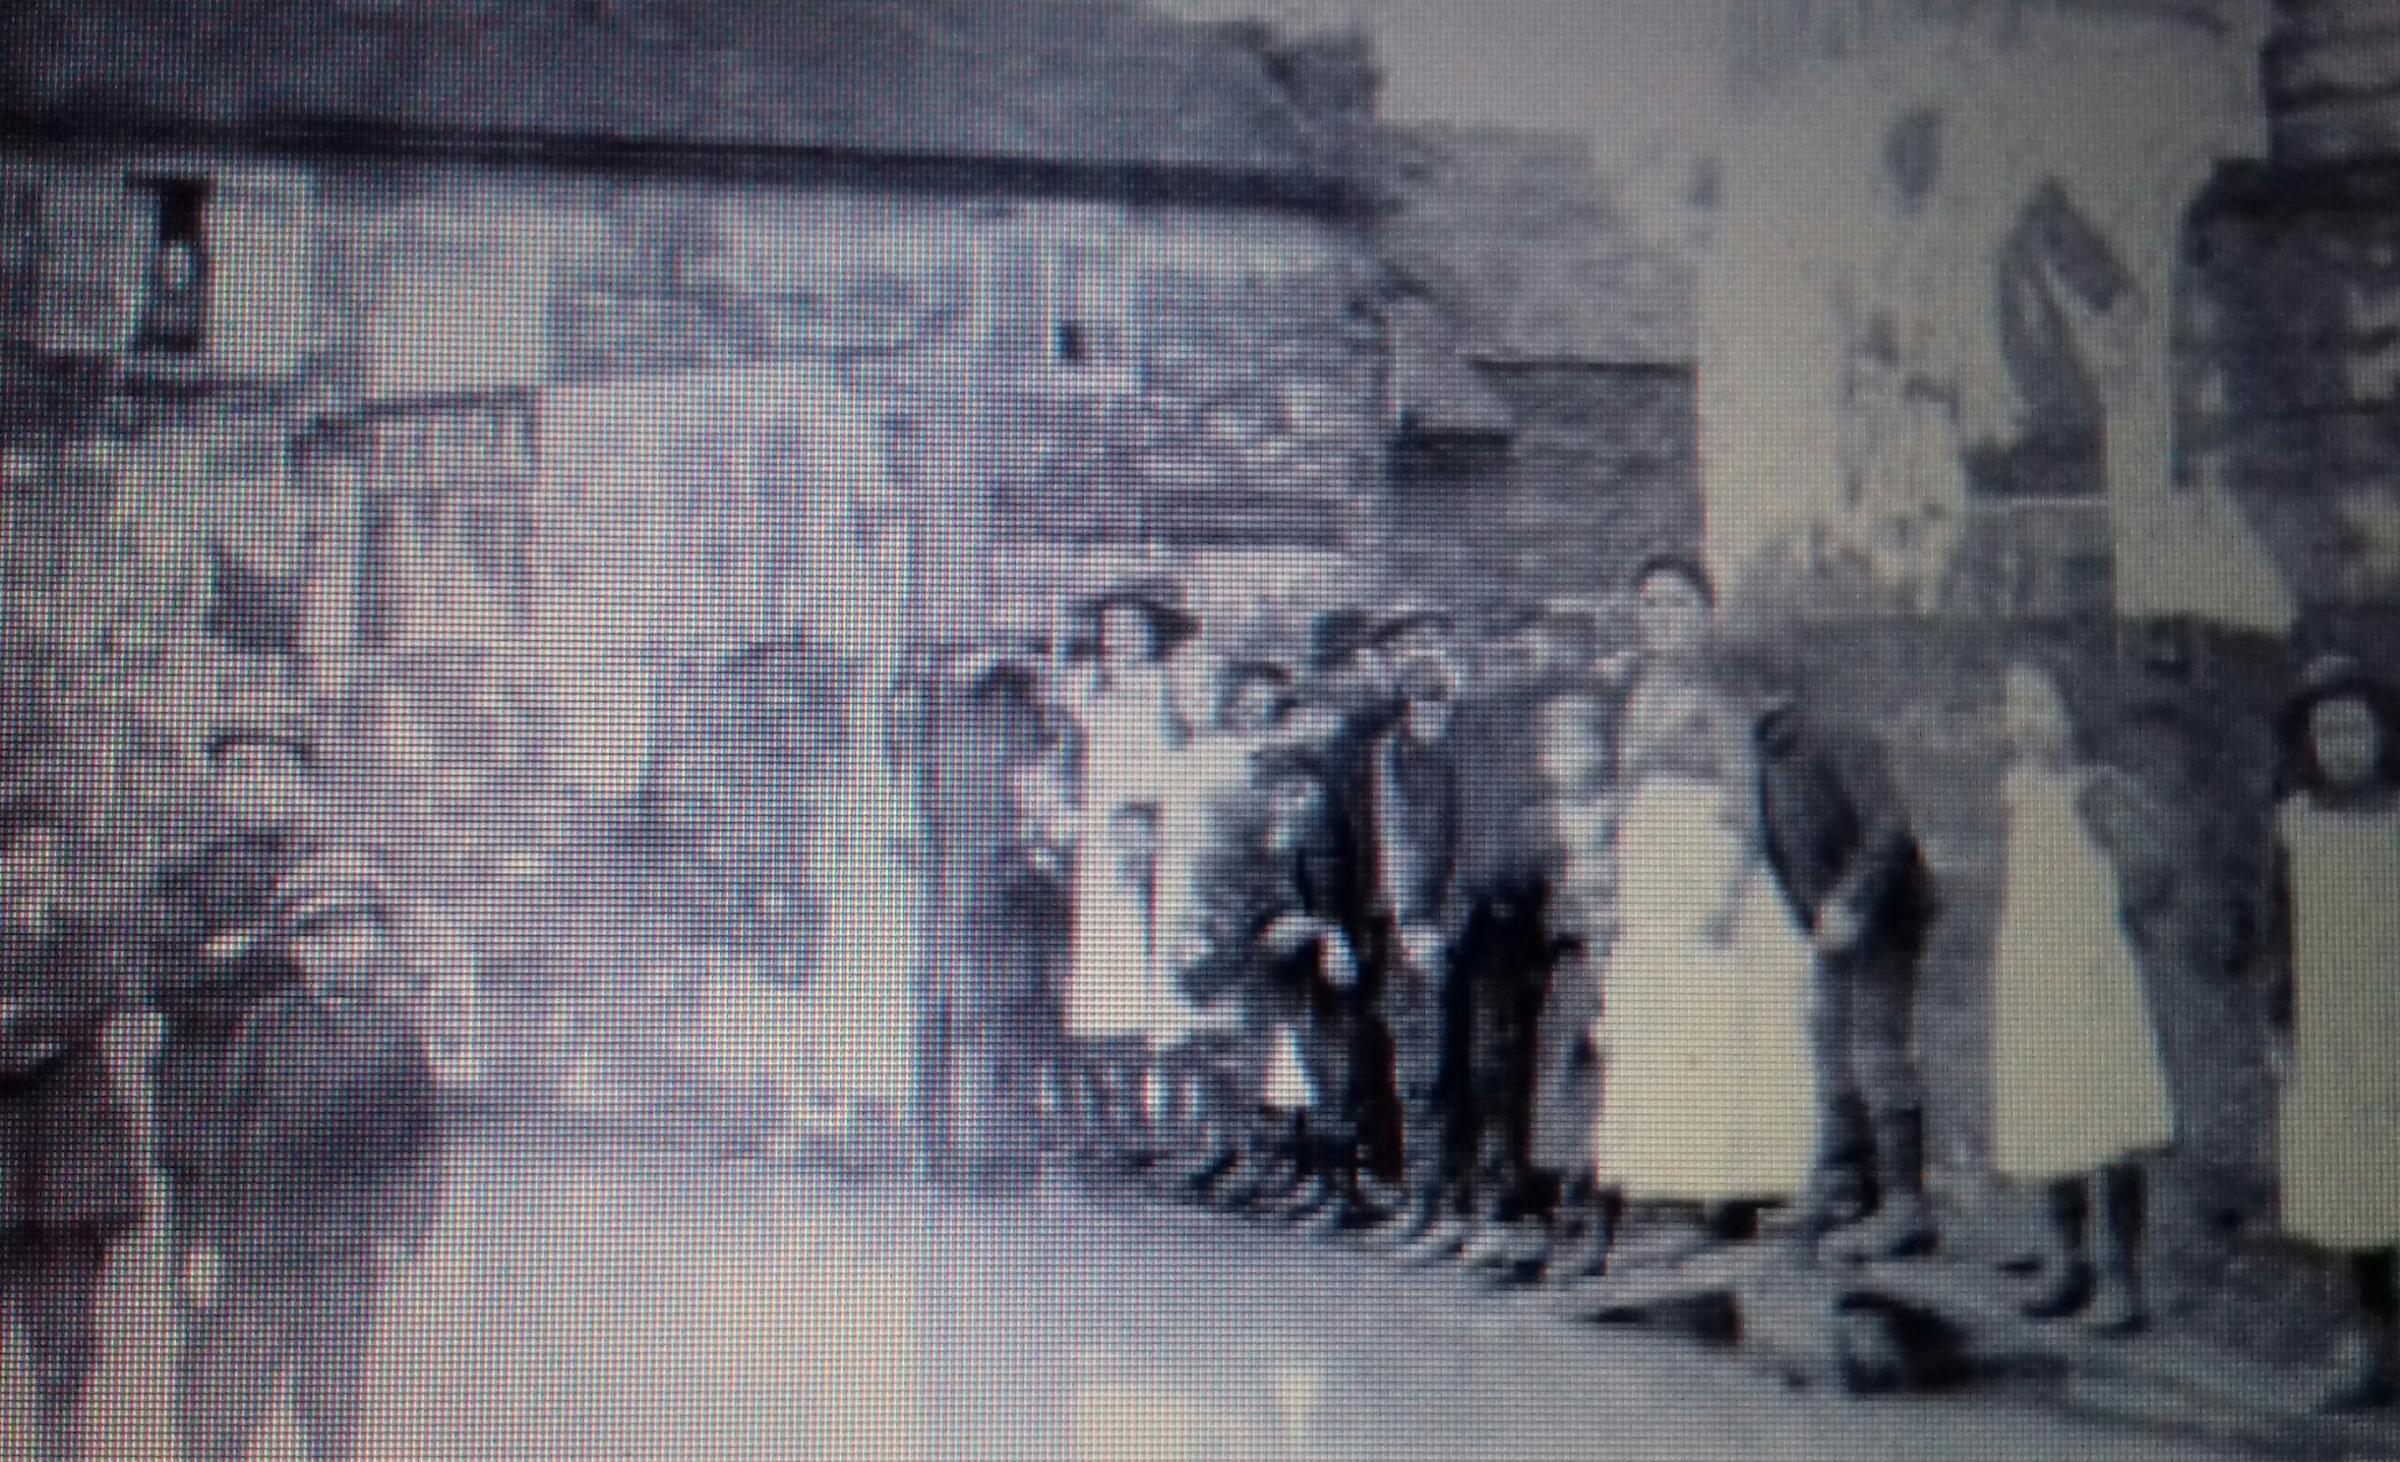 Flooding in Hylton Road, Worcester in 1910. The low lying ground near the river made it haven for cholera in the 19th century